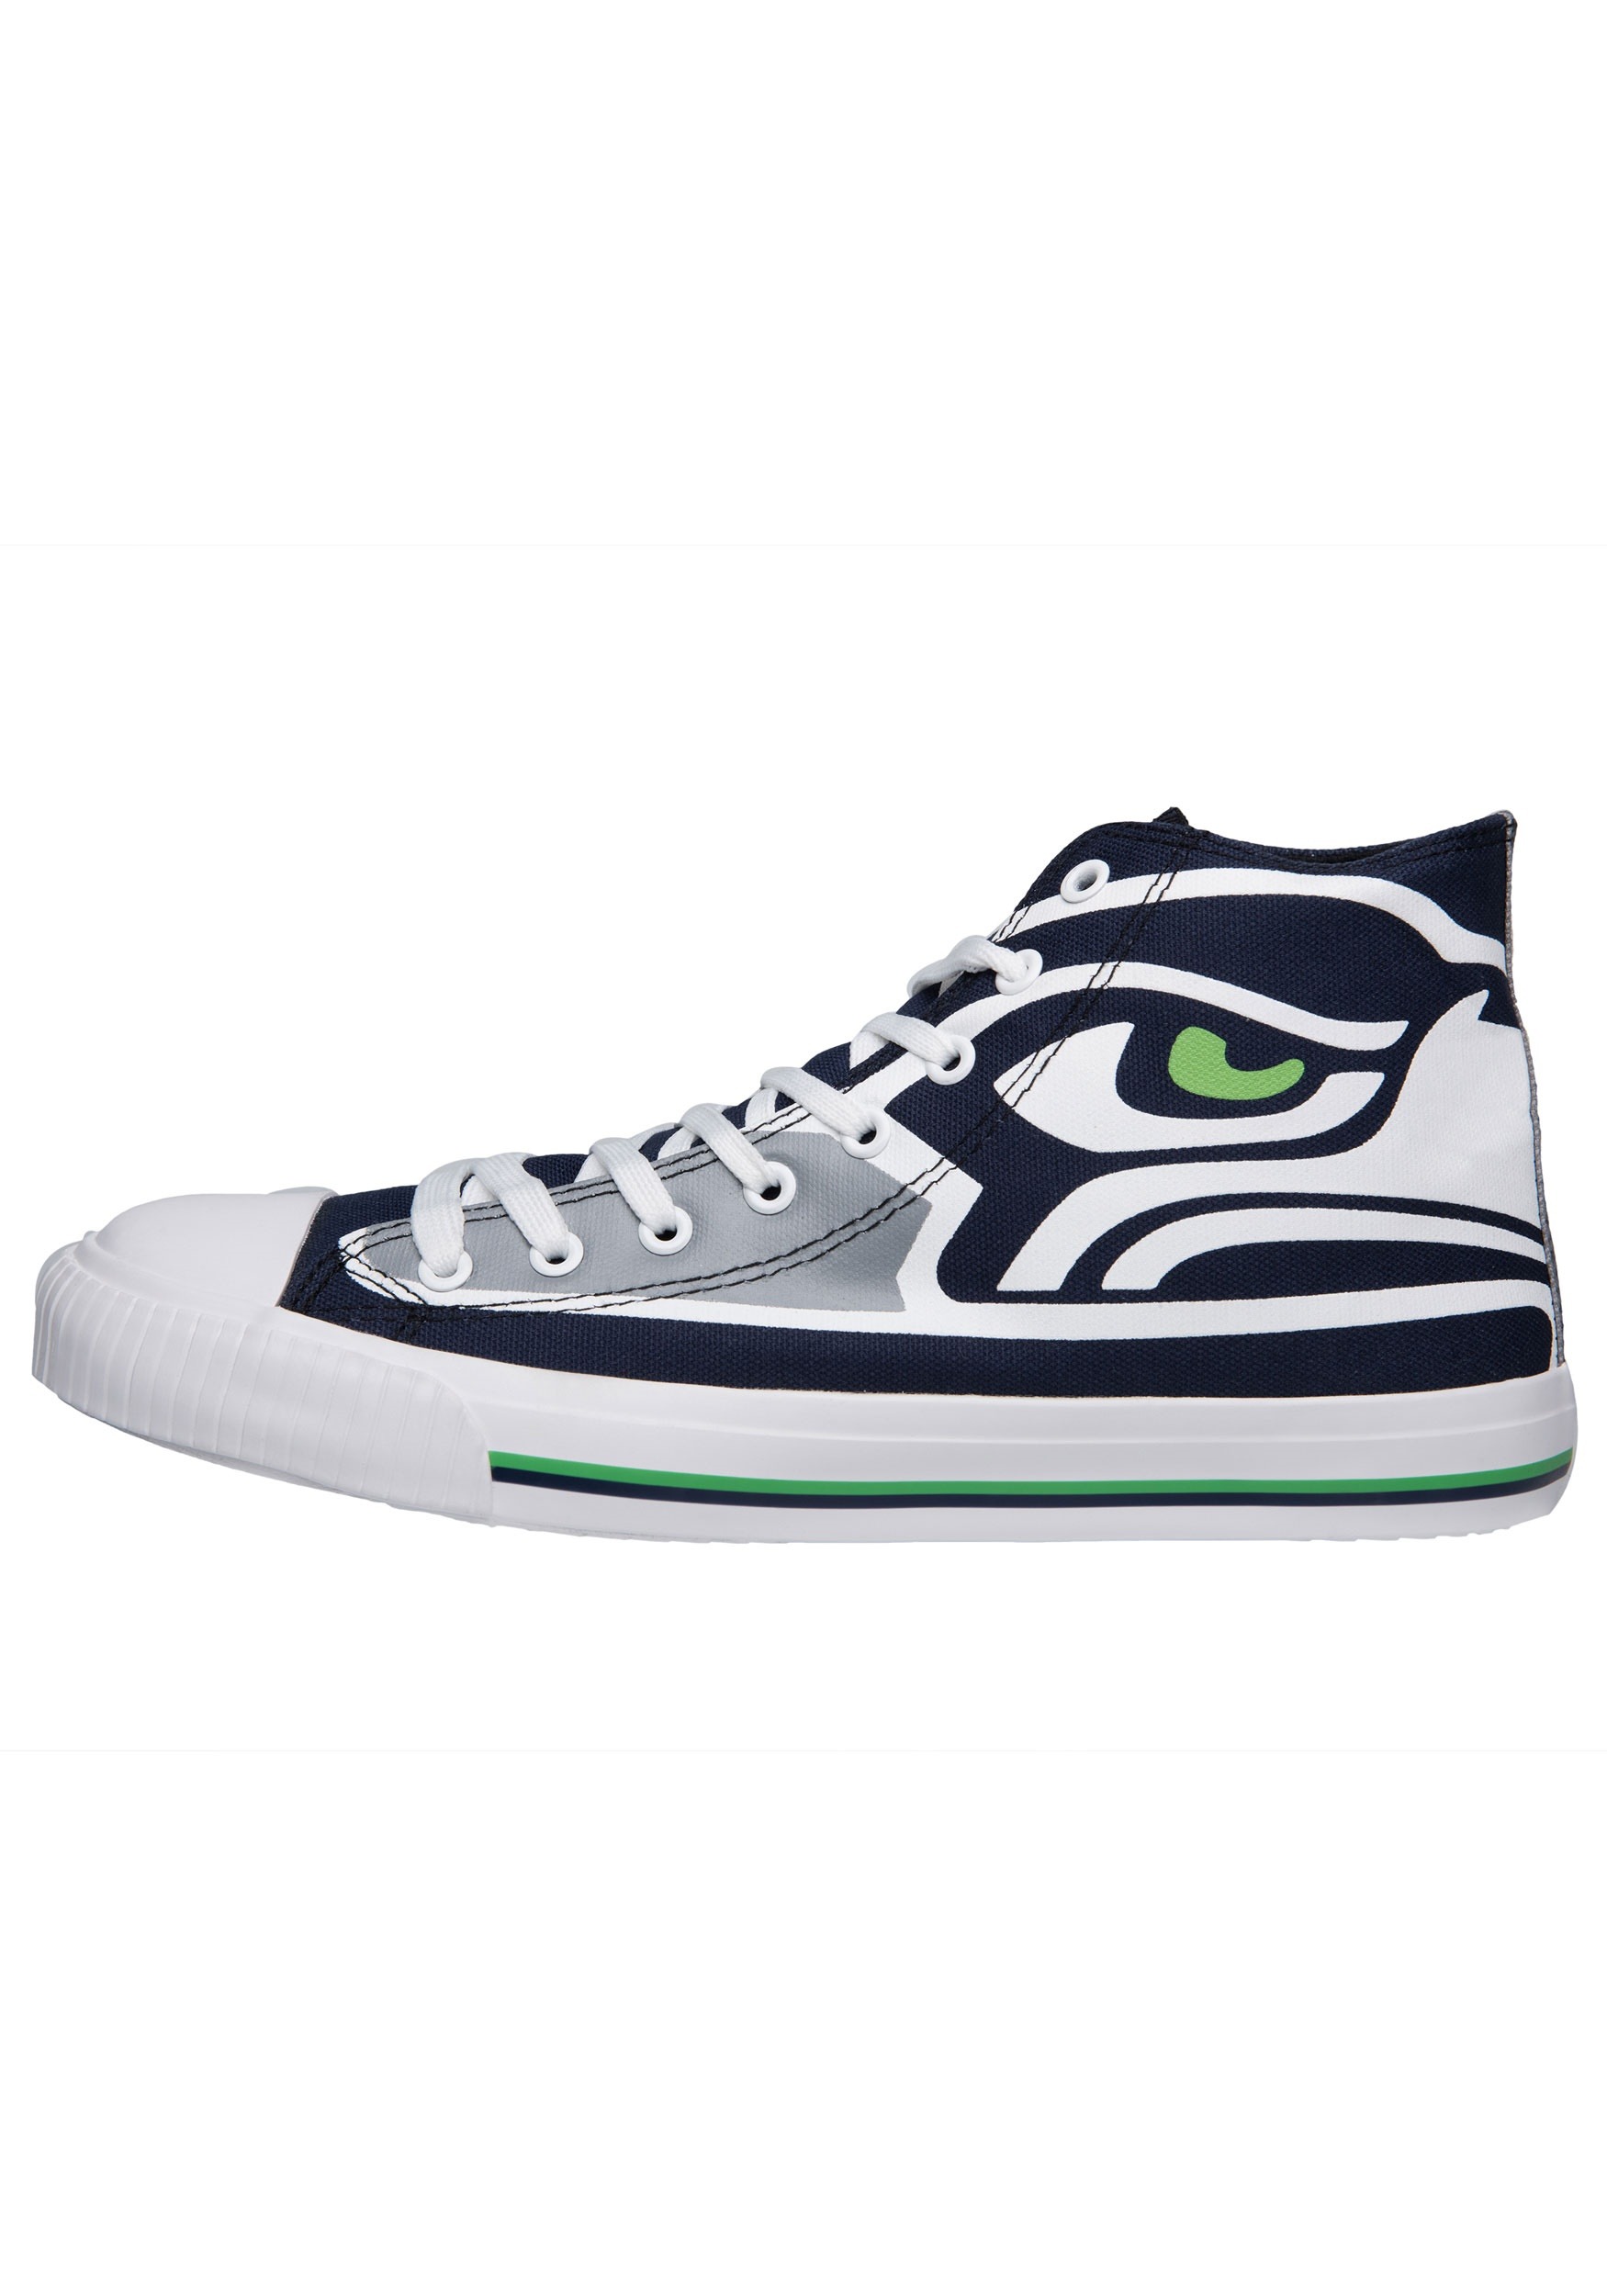 Seattle Seahawks High Top Big Logo Canvas Shoes for Men